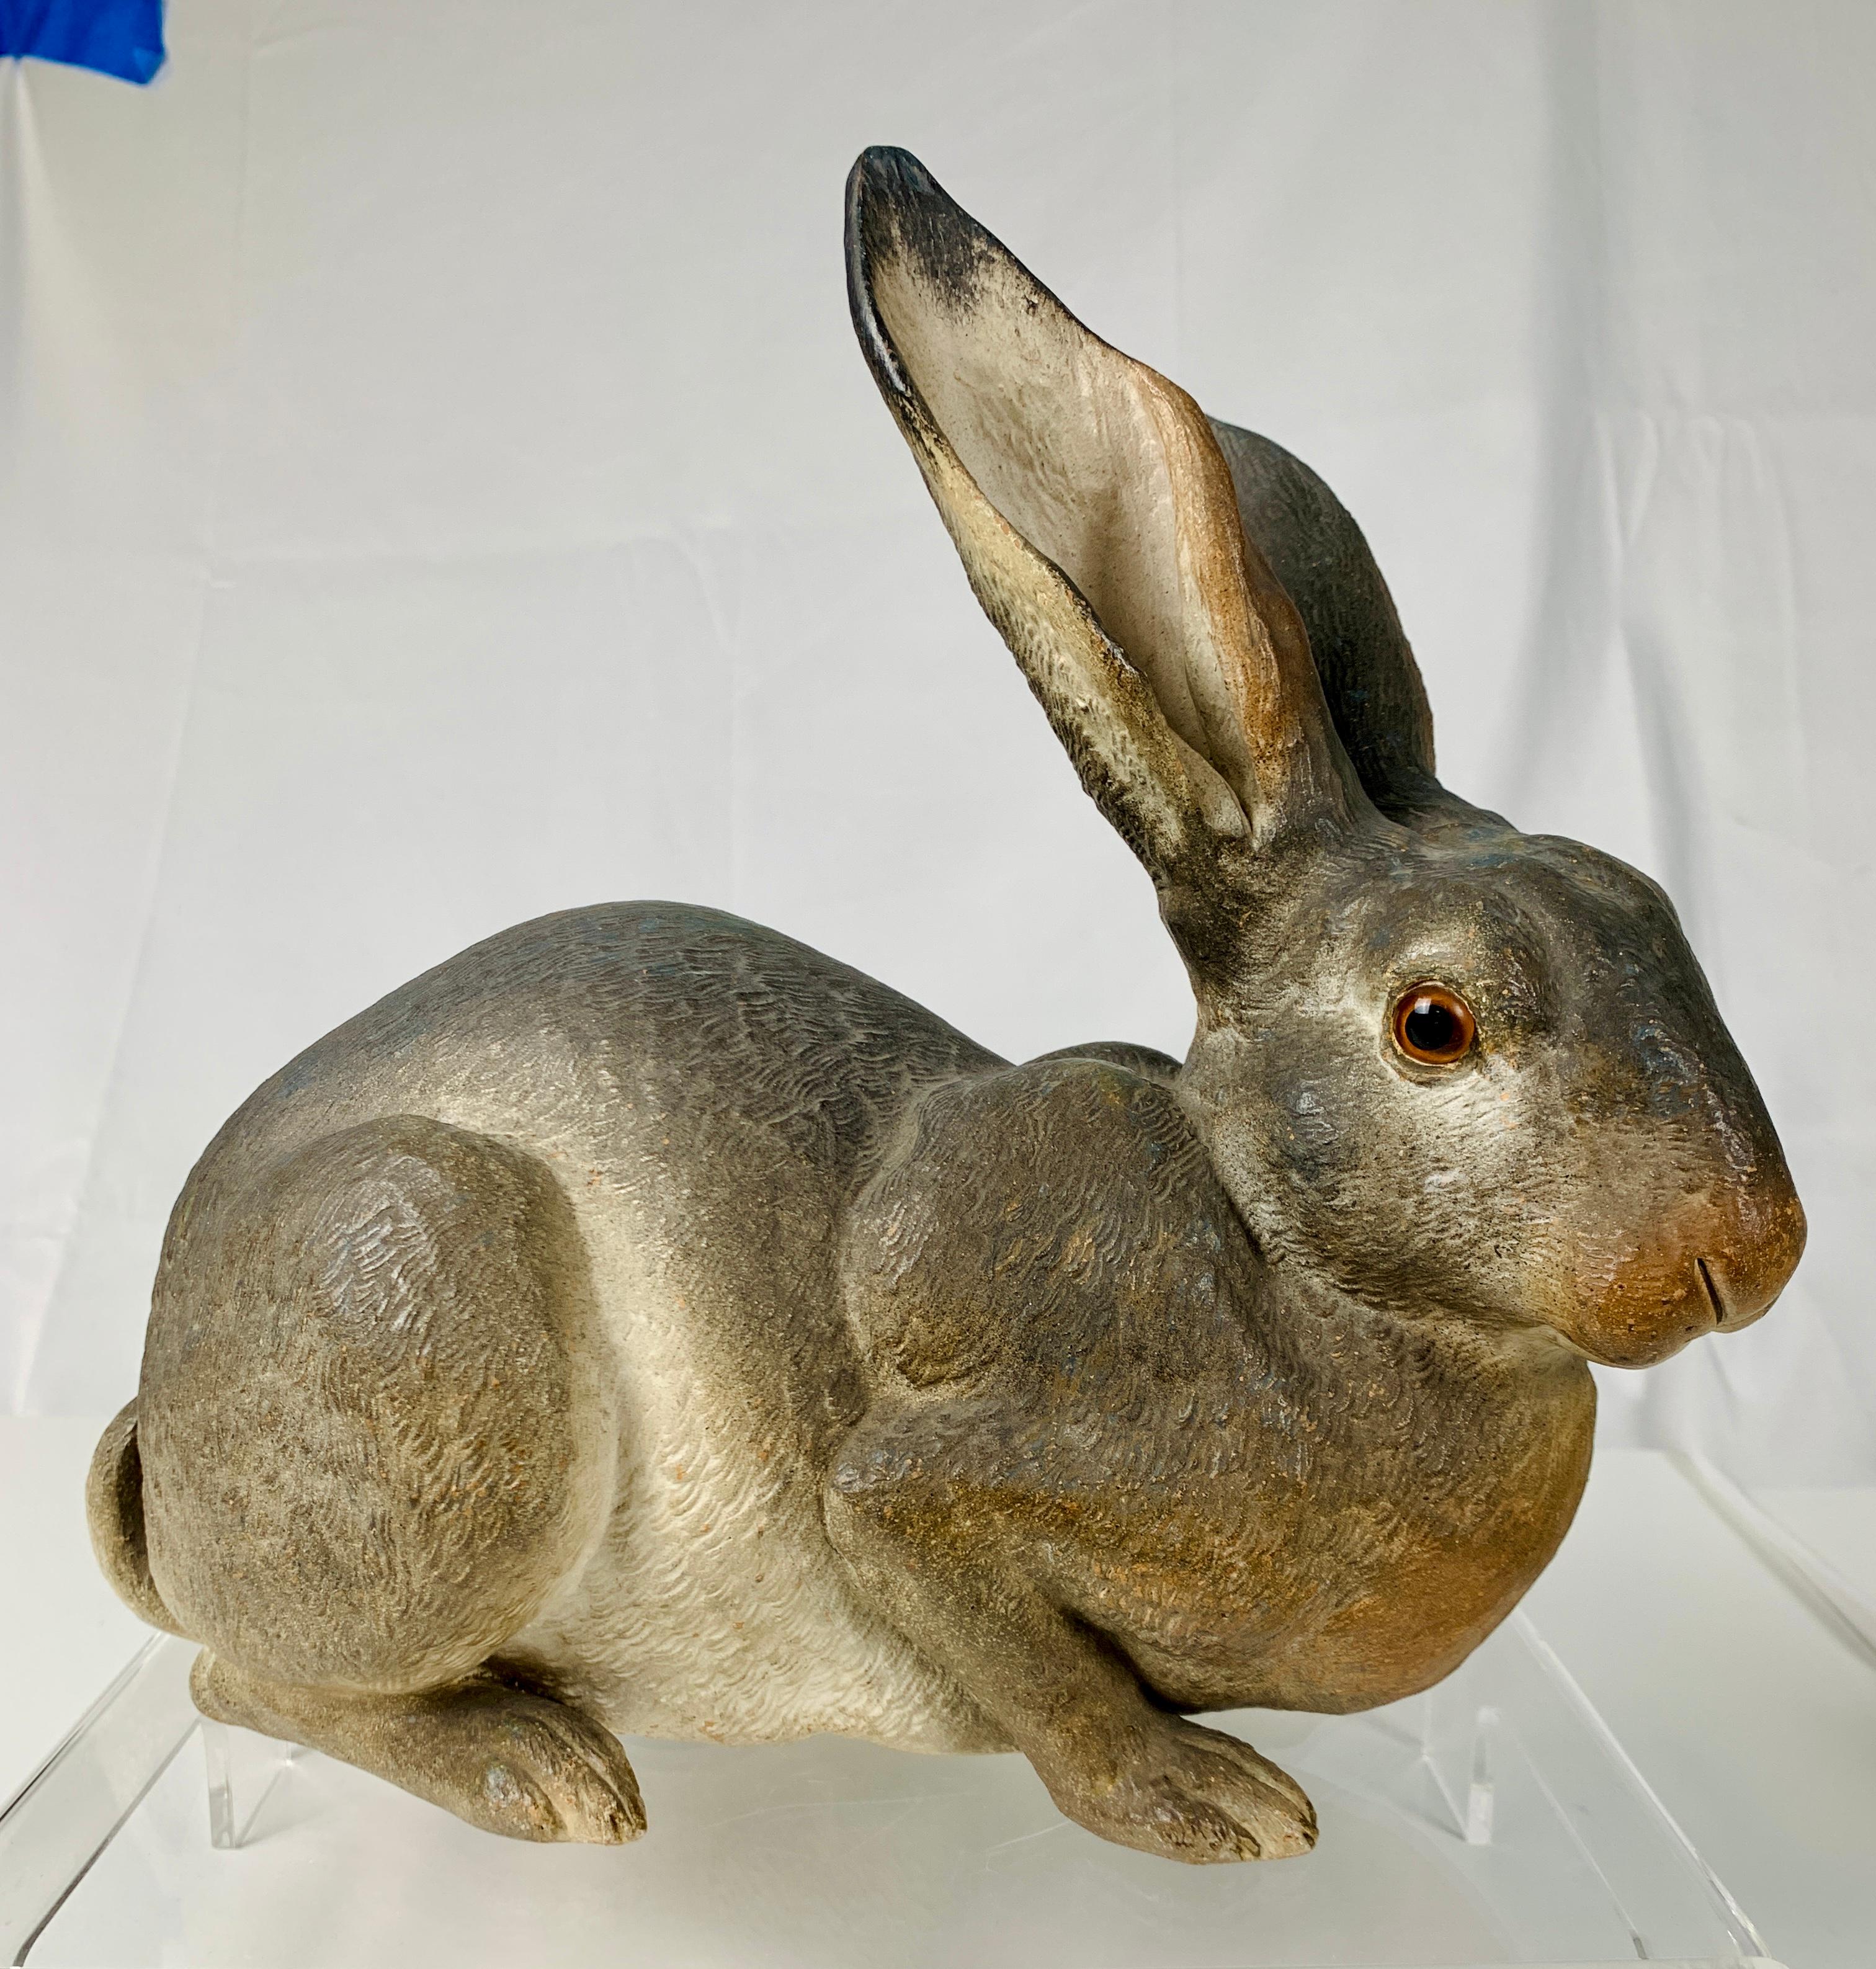 19th Century Animalia Life-Size Model of a Rabbit Hand-Painted Made of Terracotta